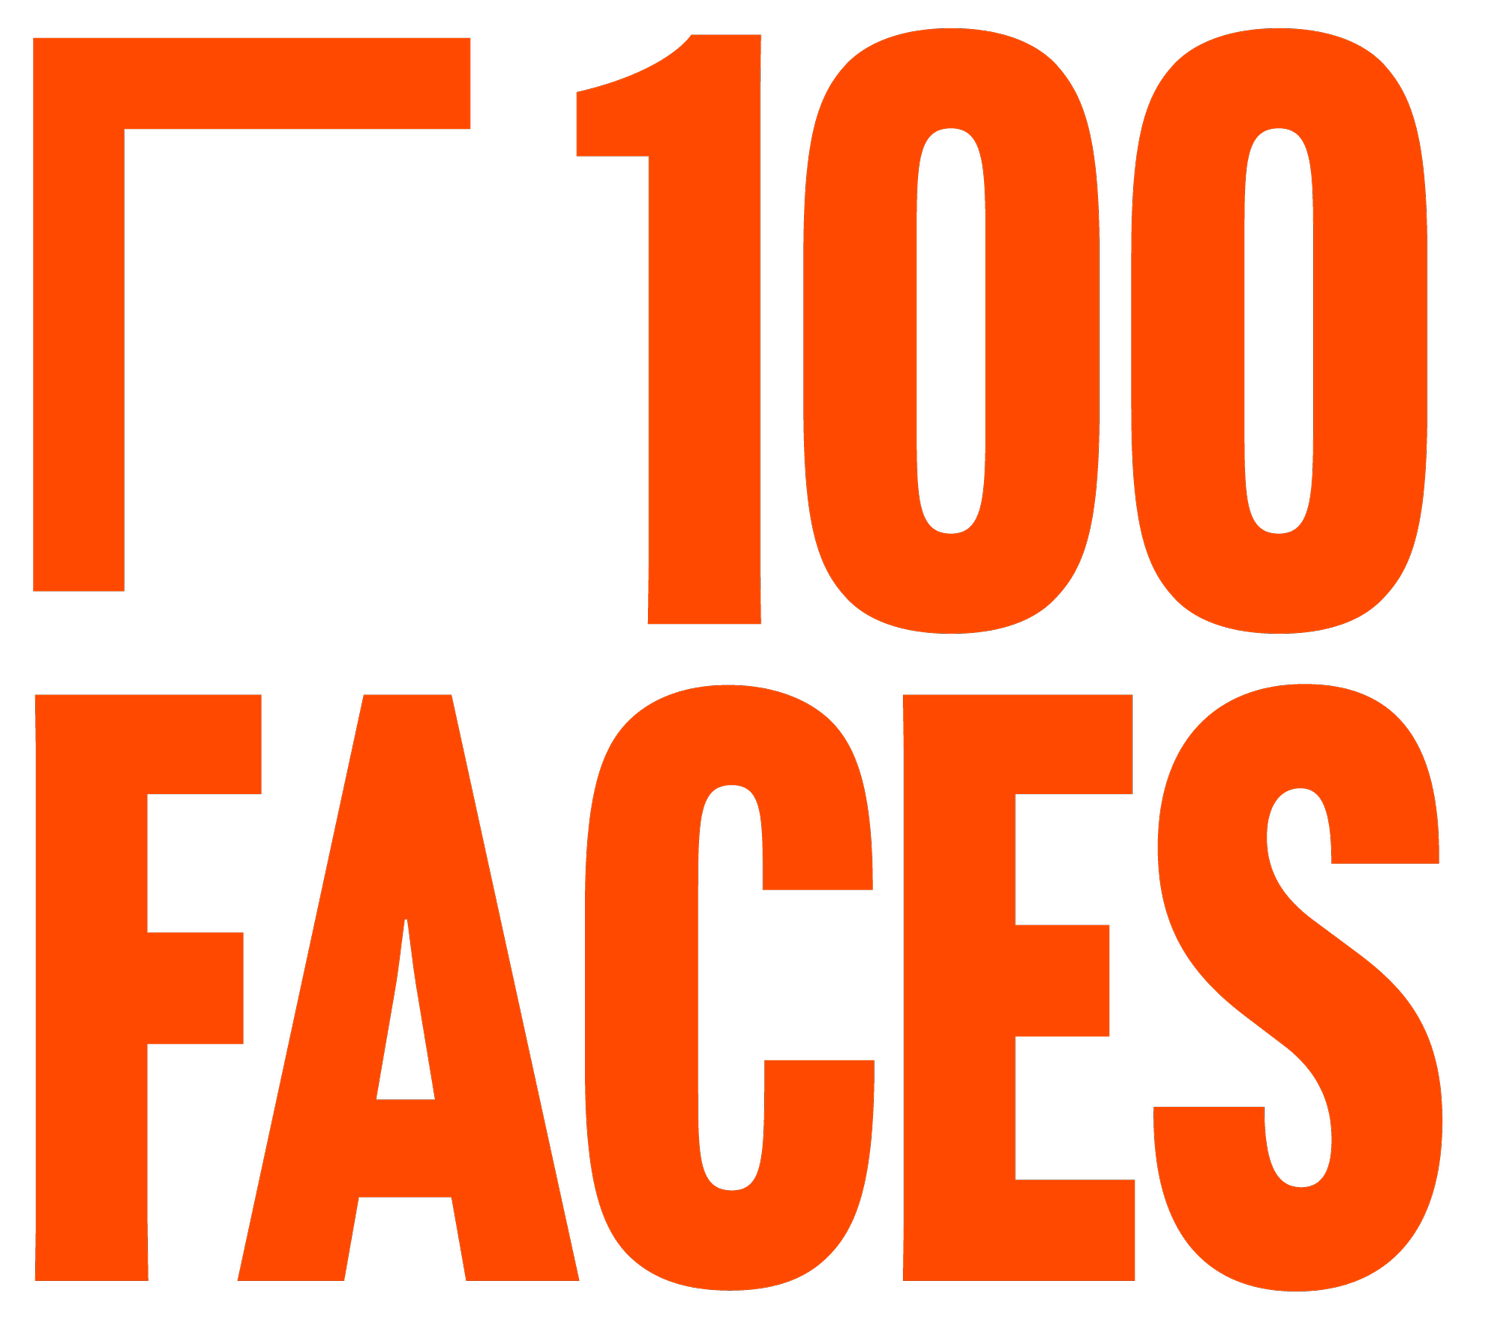 100 Faces – First in my family